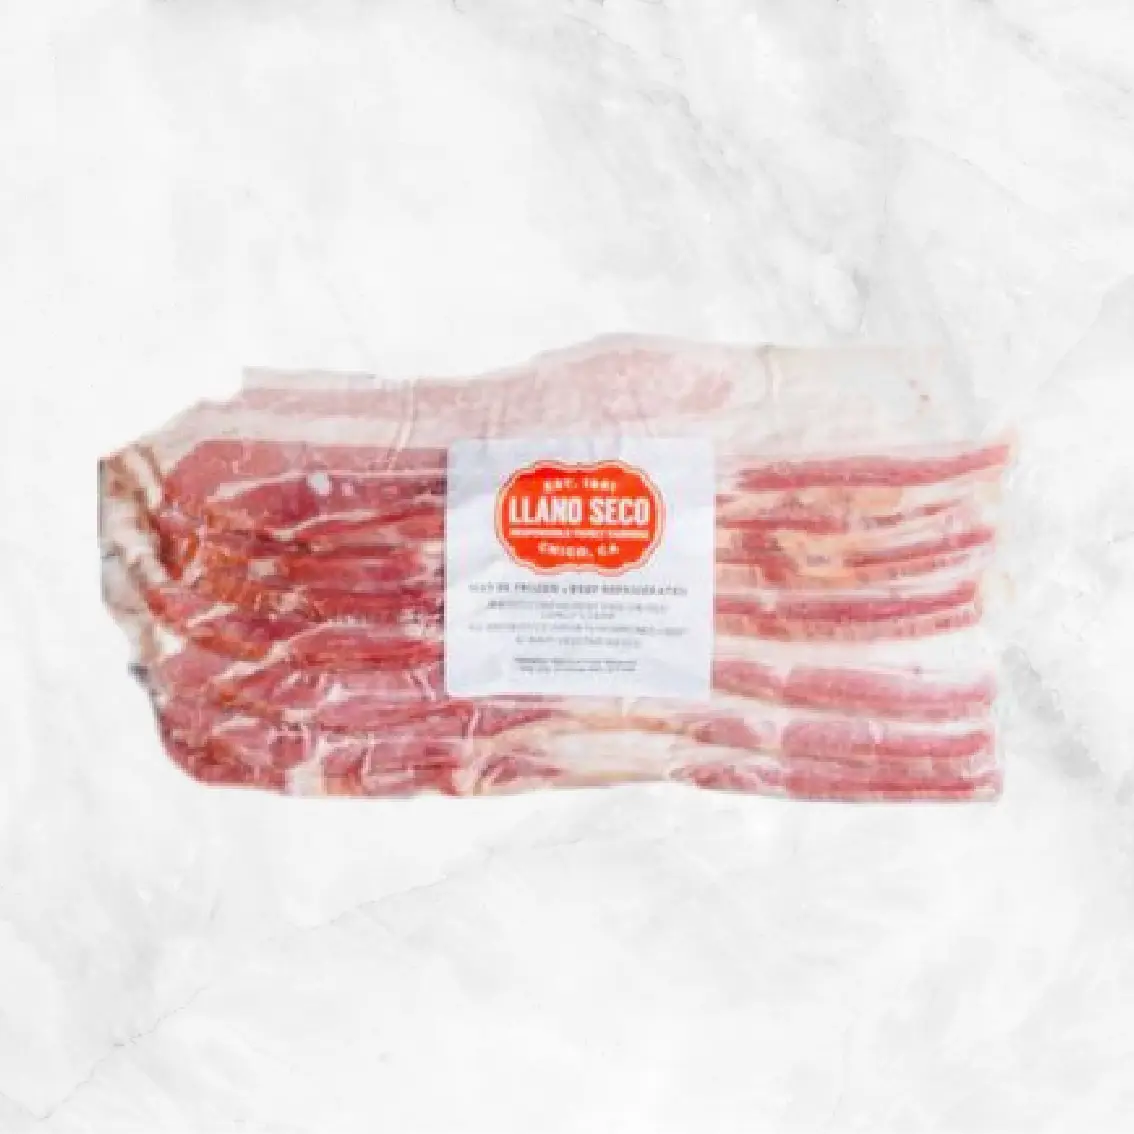 Thick Cut Uncured Bacon Delivery